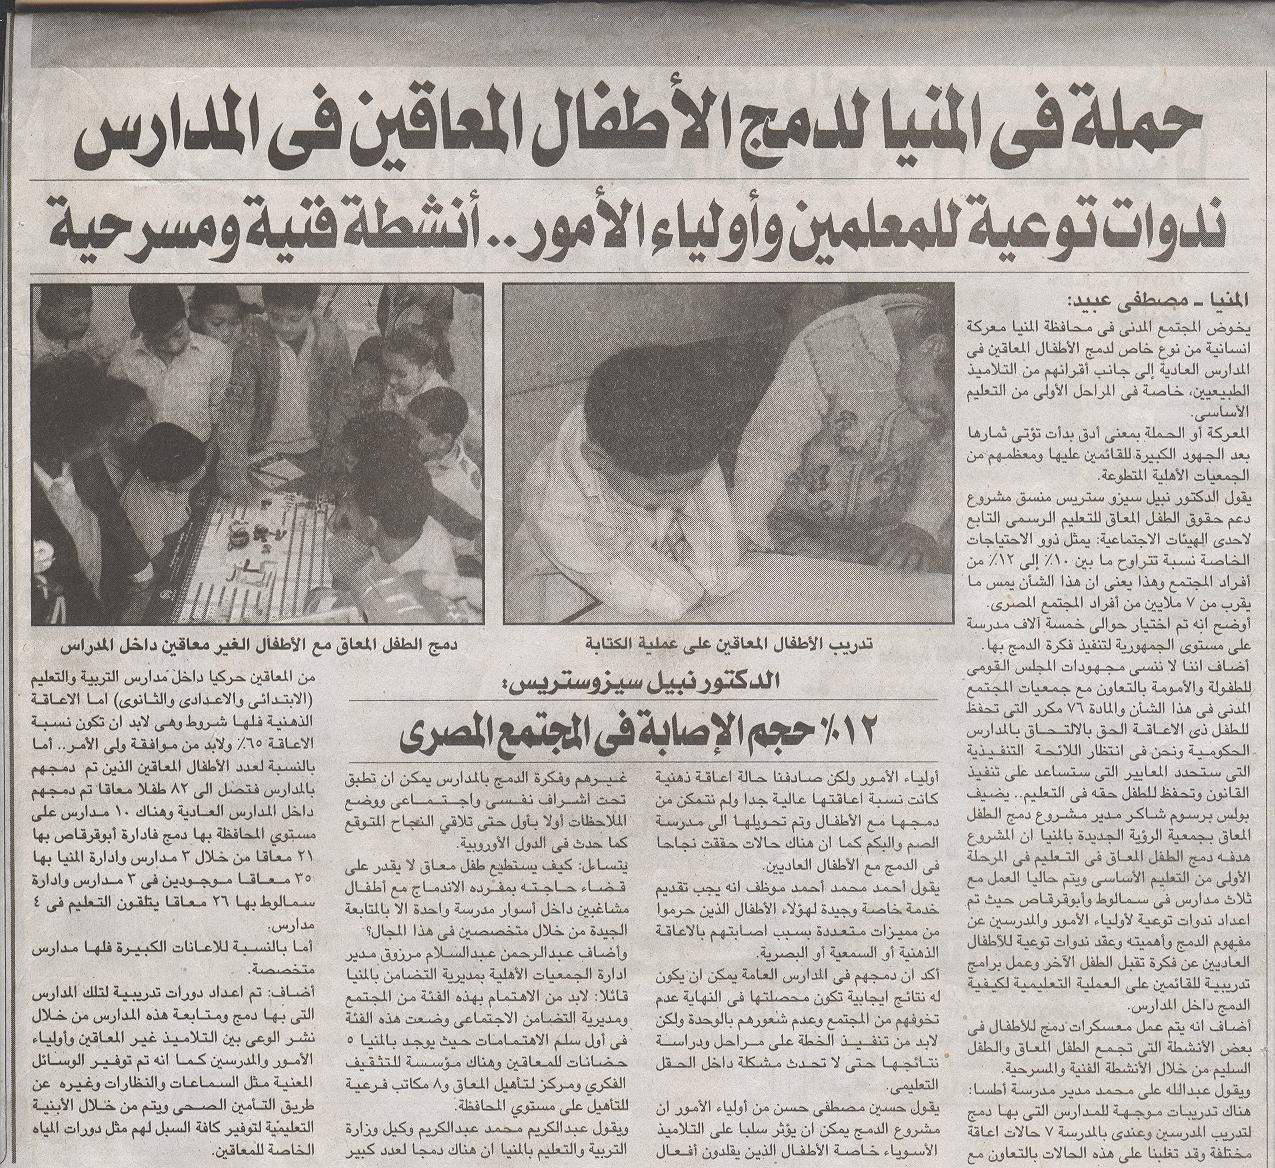 Press Coverage: campaign in Minya to integrate children with disabilities in schools